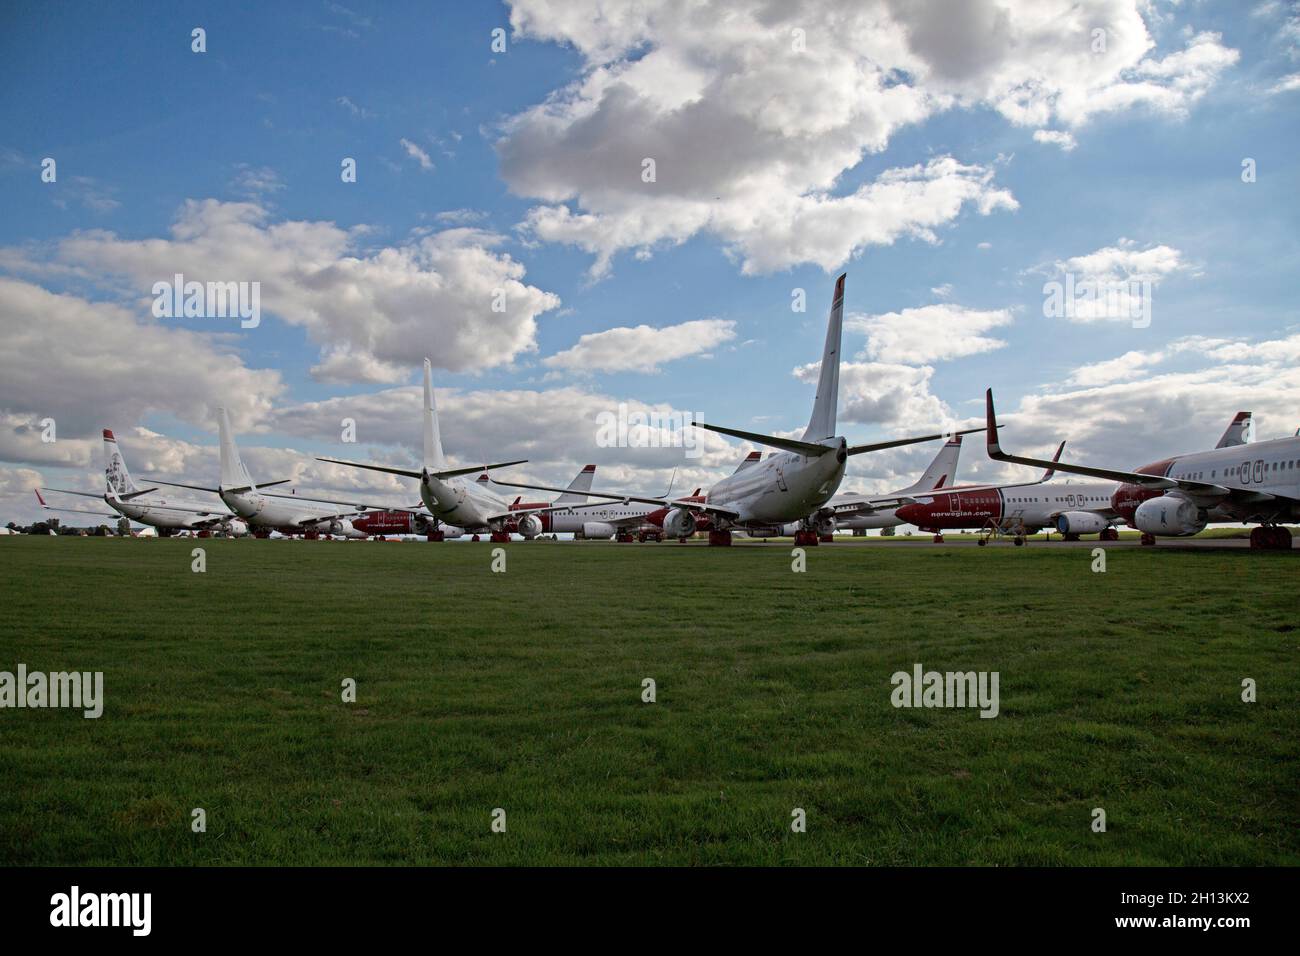 A row of Boeing 737 airliners in storage at Cotswold Airport, England. These have been in storage due to lack of business due to the COVID epidemic. Stock Photo